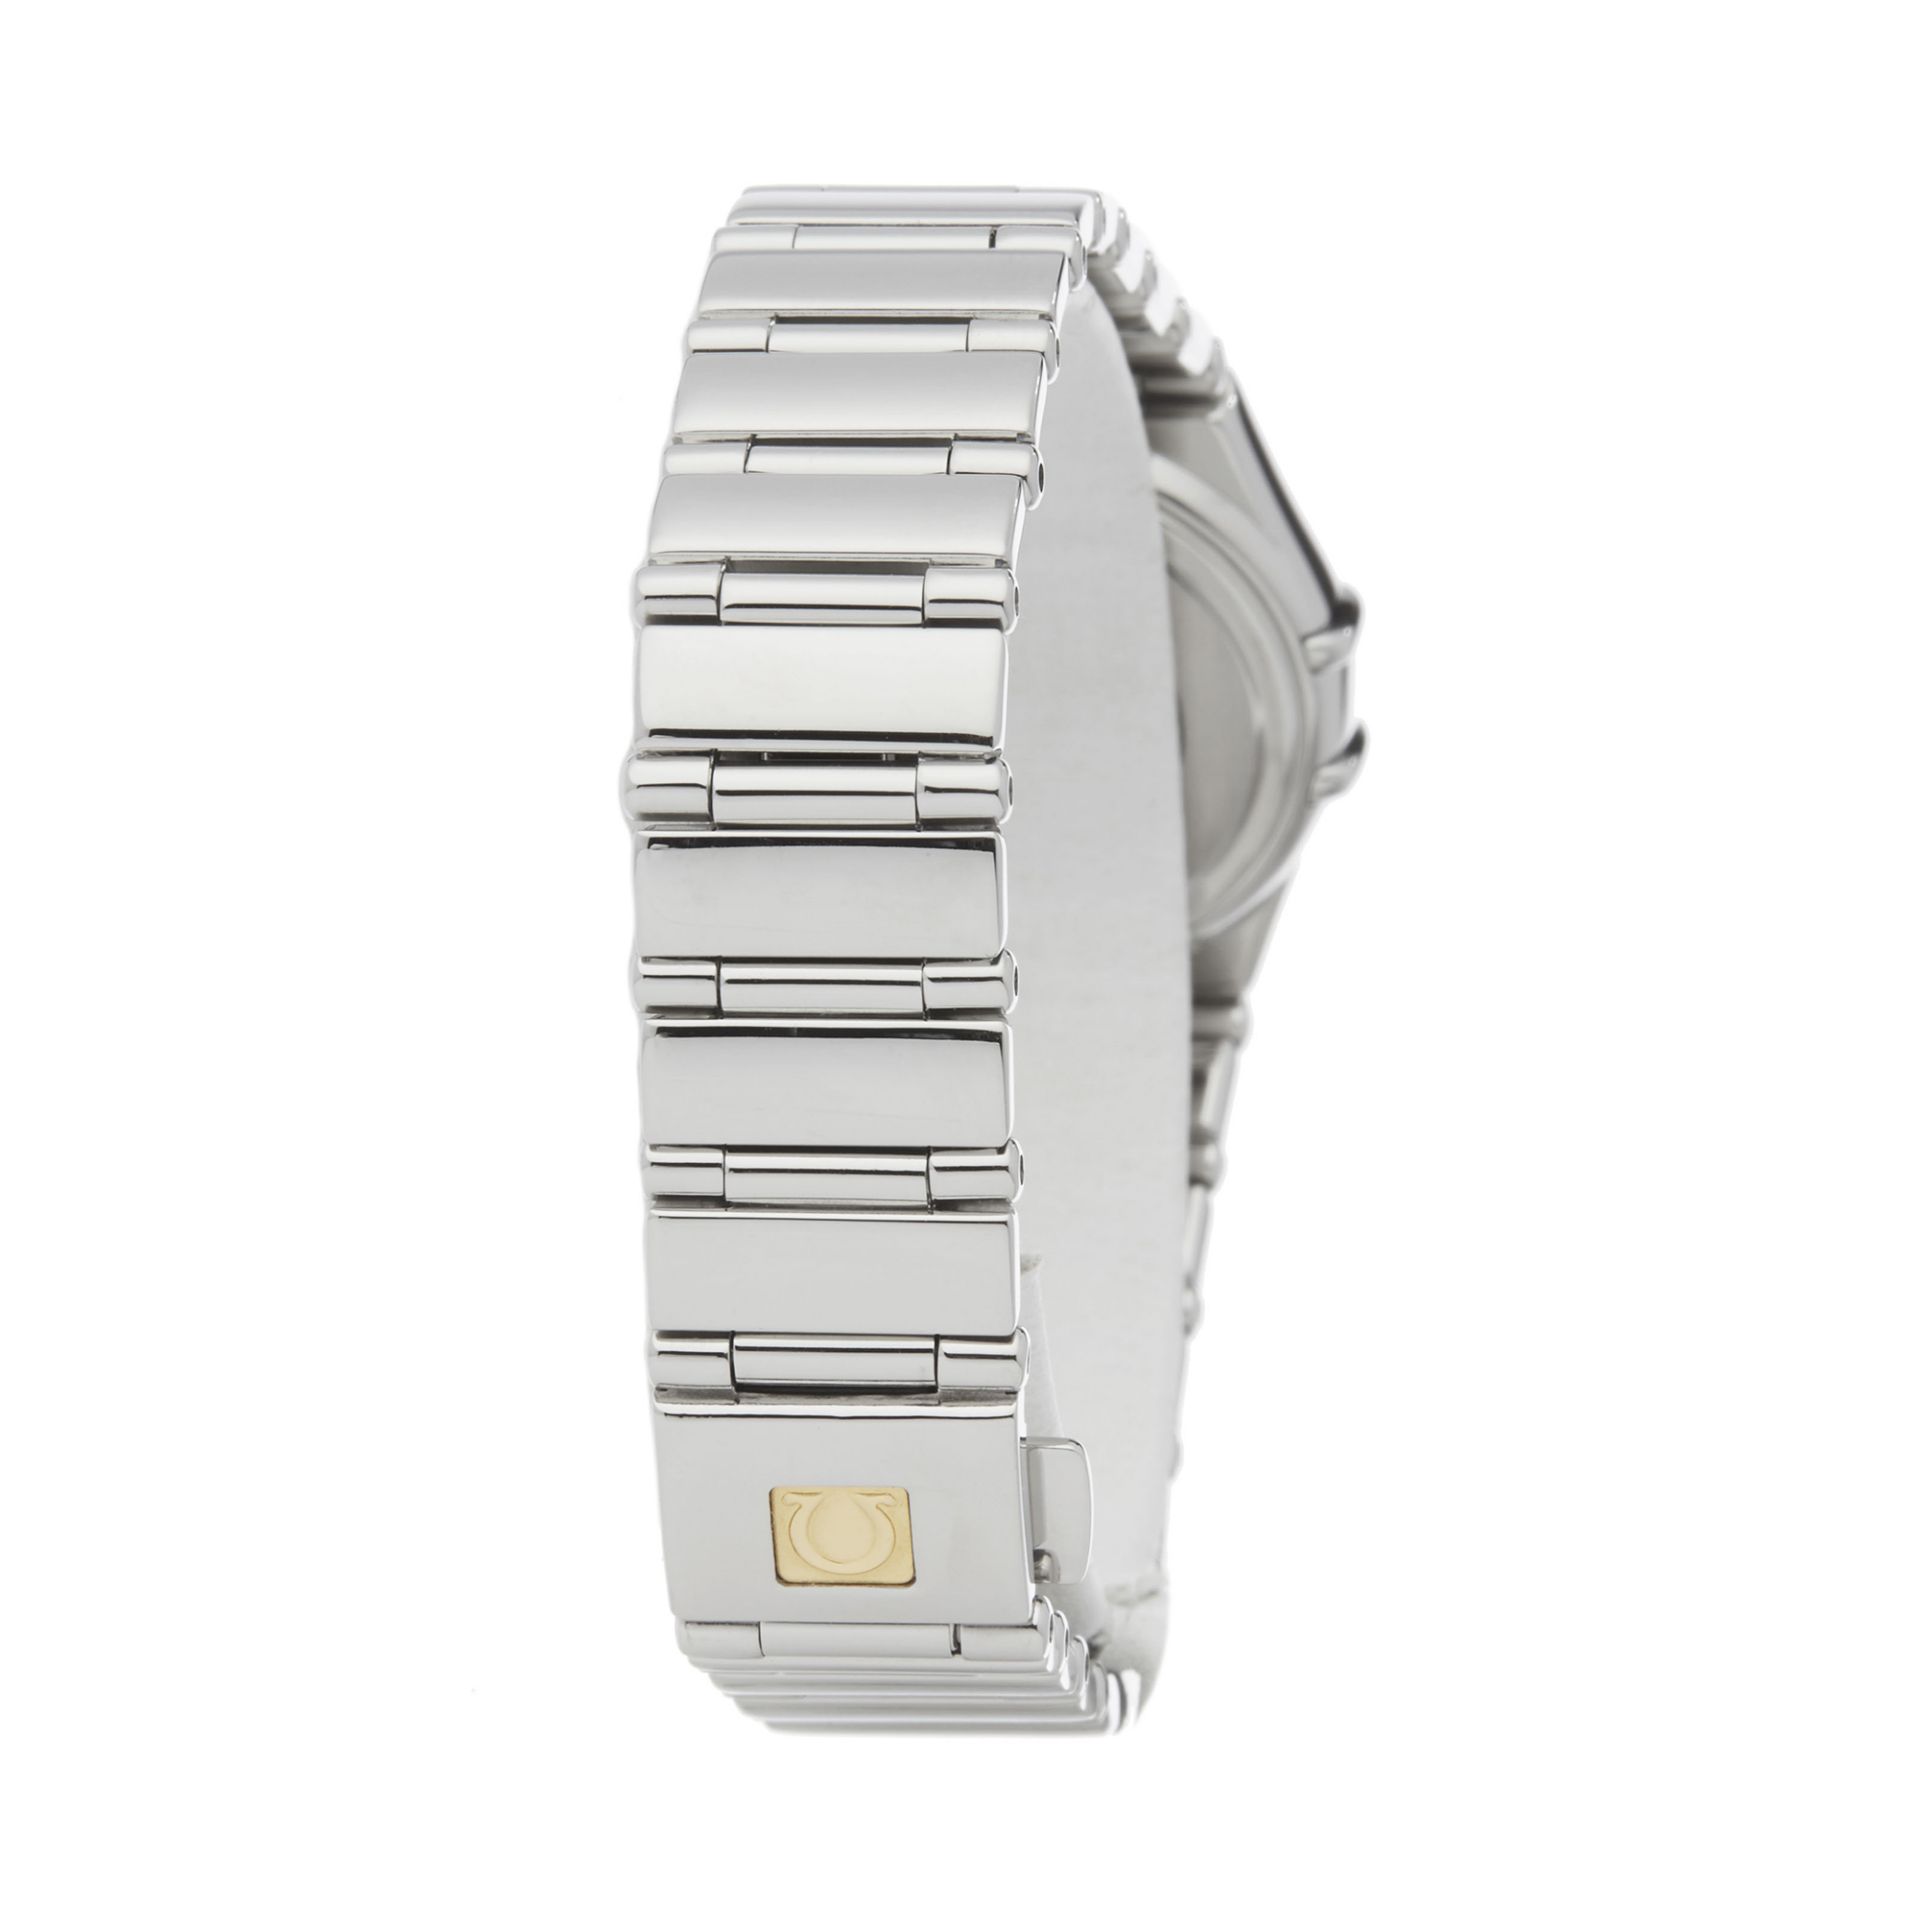 Omega Constellation 1465.71.00 Ladies Stainless Steel Diamond Mother Of Pearl Watch - Image 5 of 8